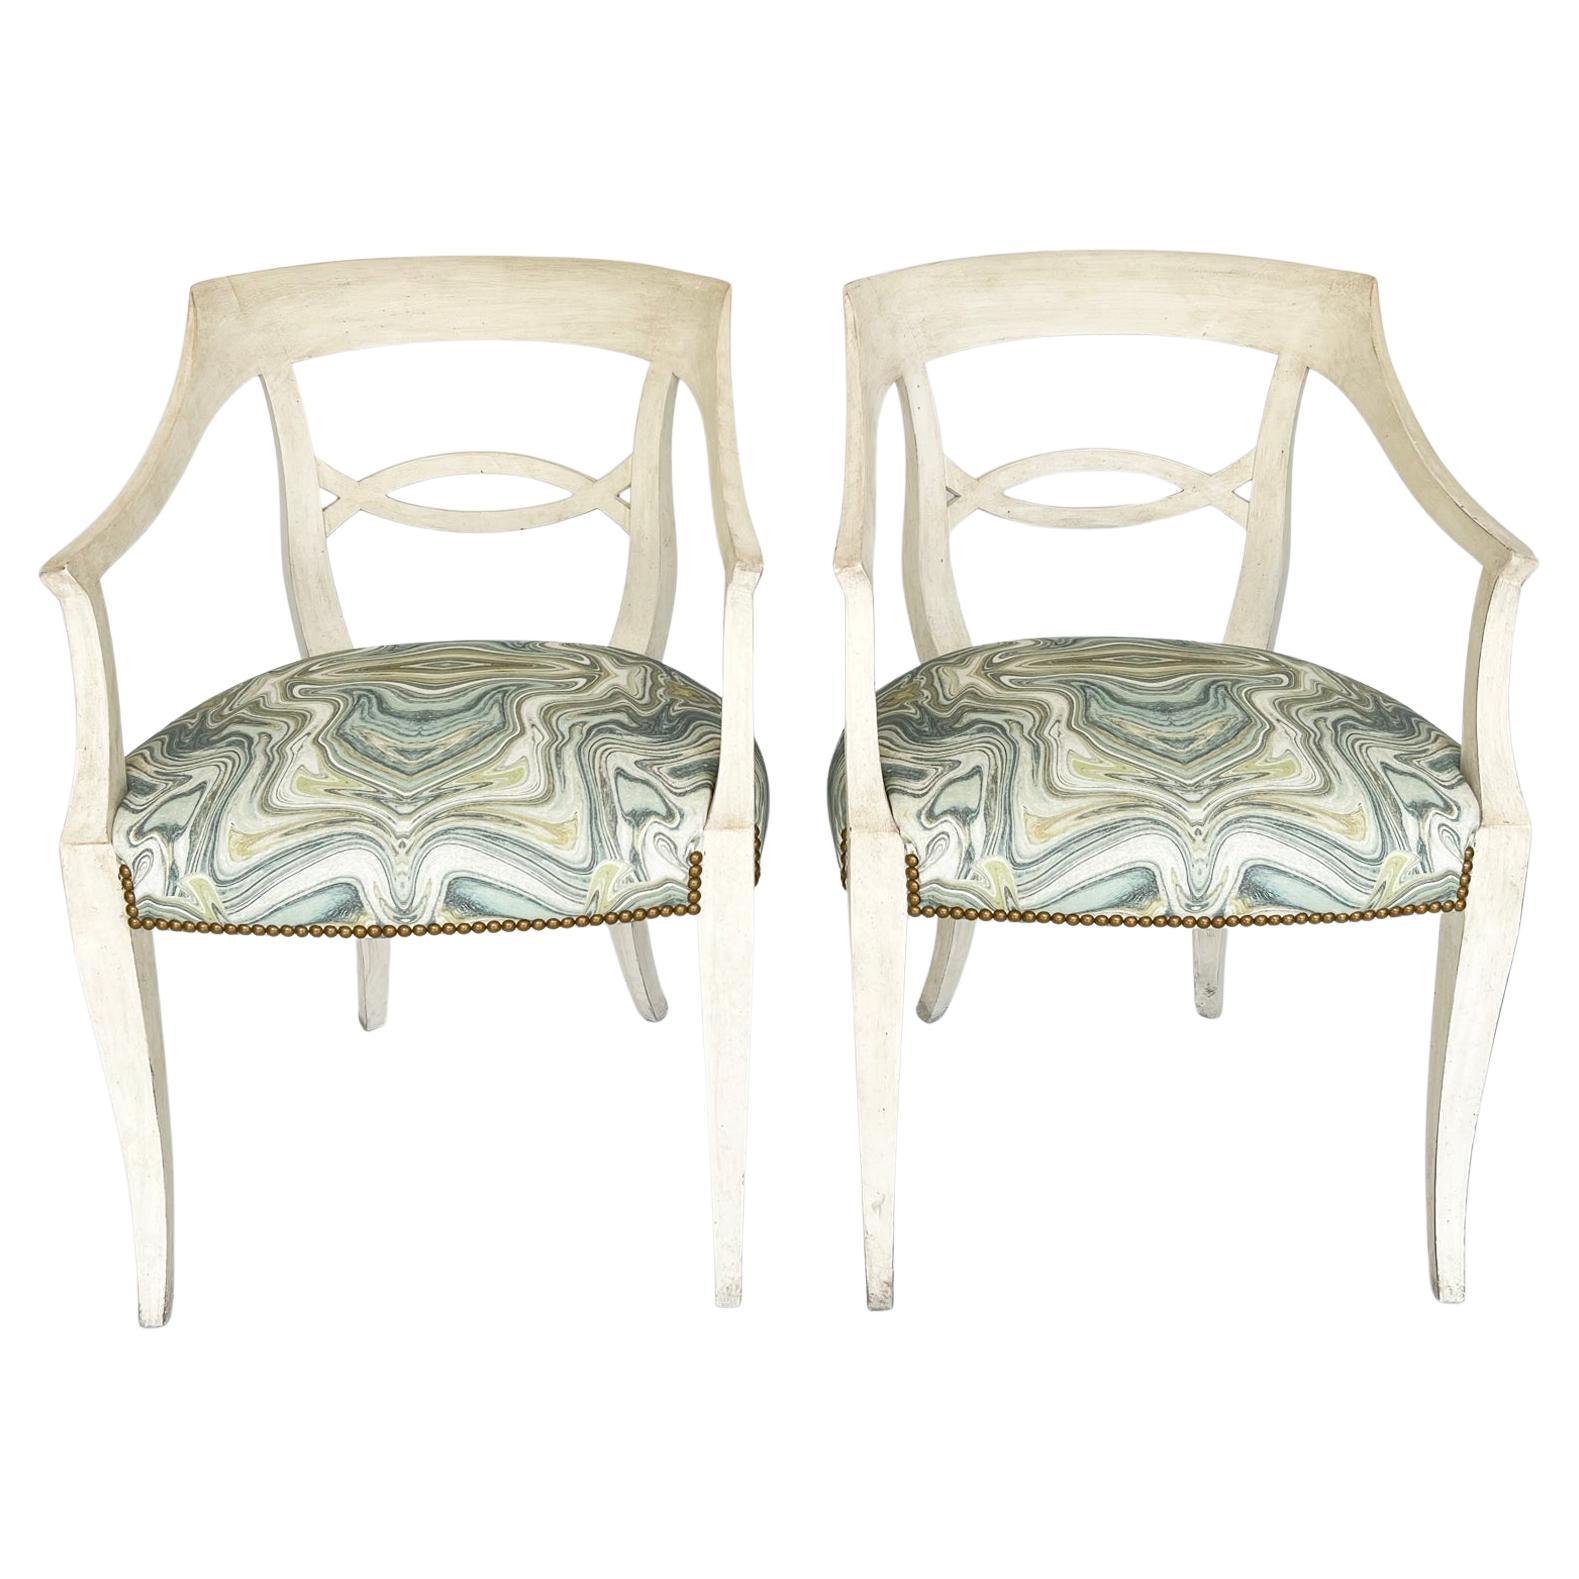 Pair of Painted Armchairs by Baker